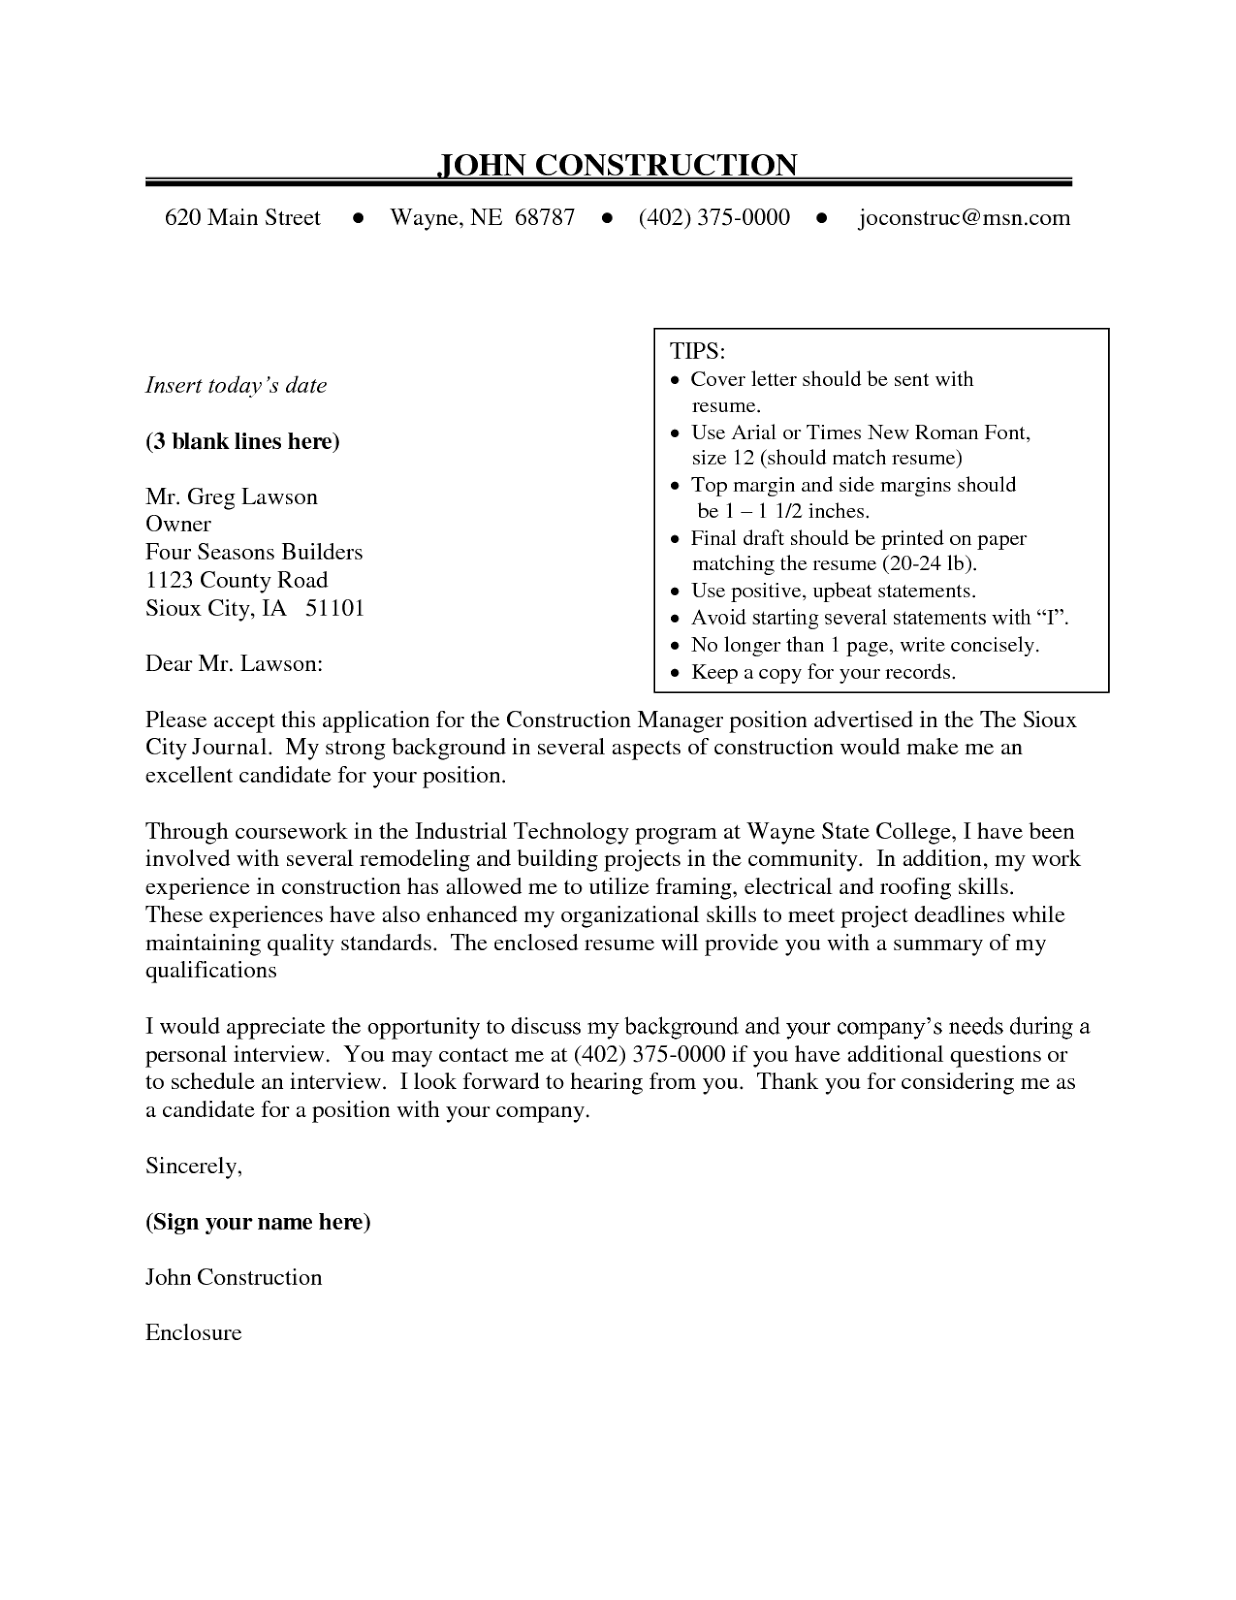 Apa cover letter sample templates